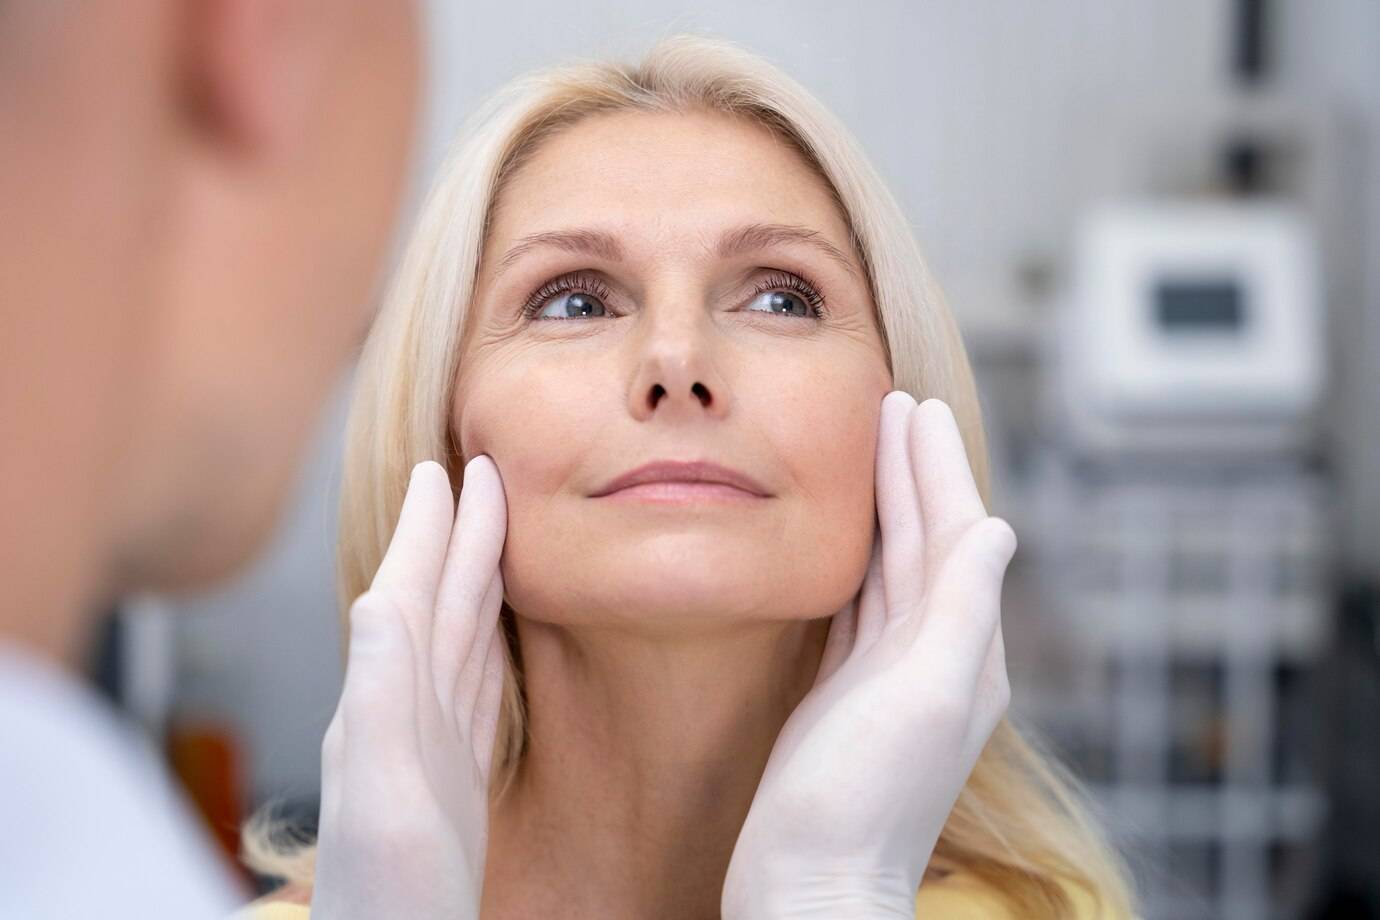 Demystifying Cosmetic Botox - What you need to know before your first treatment